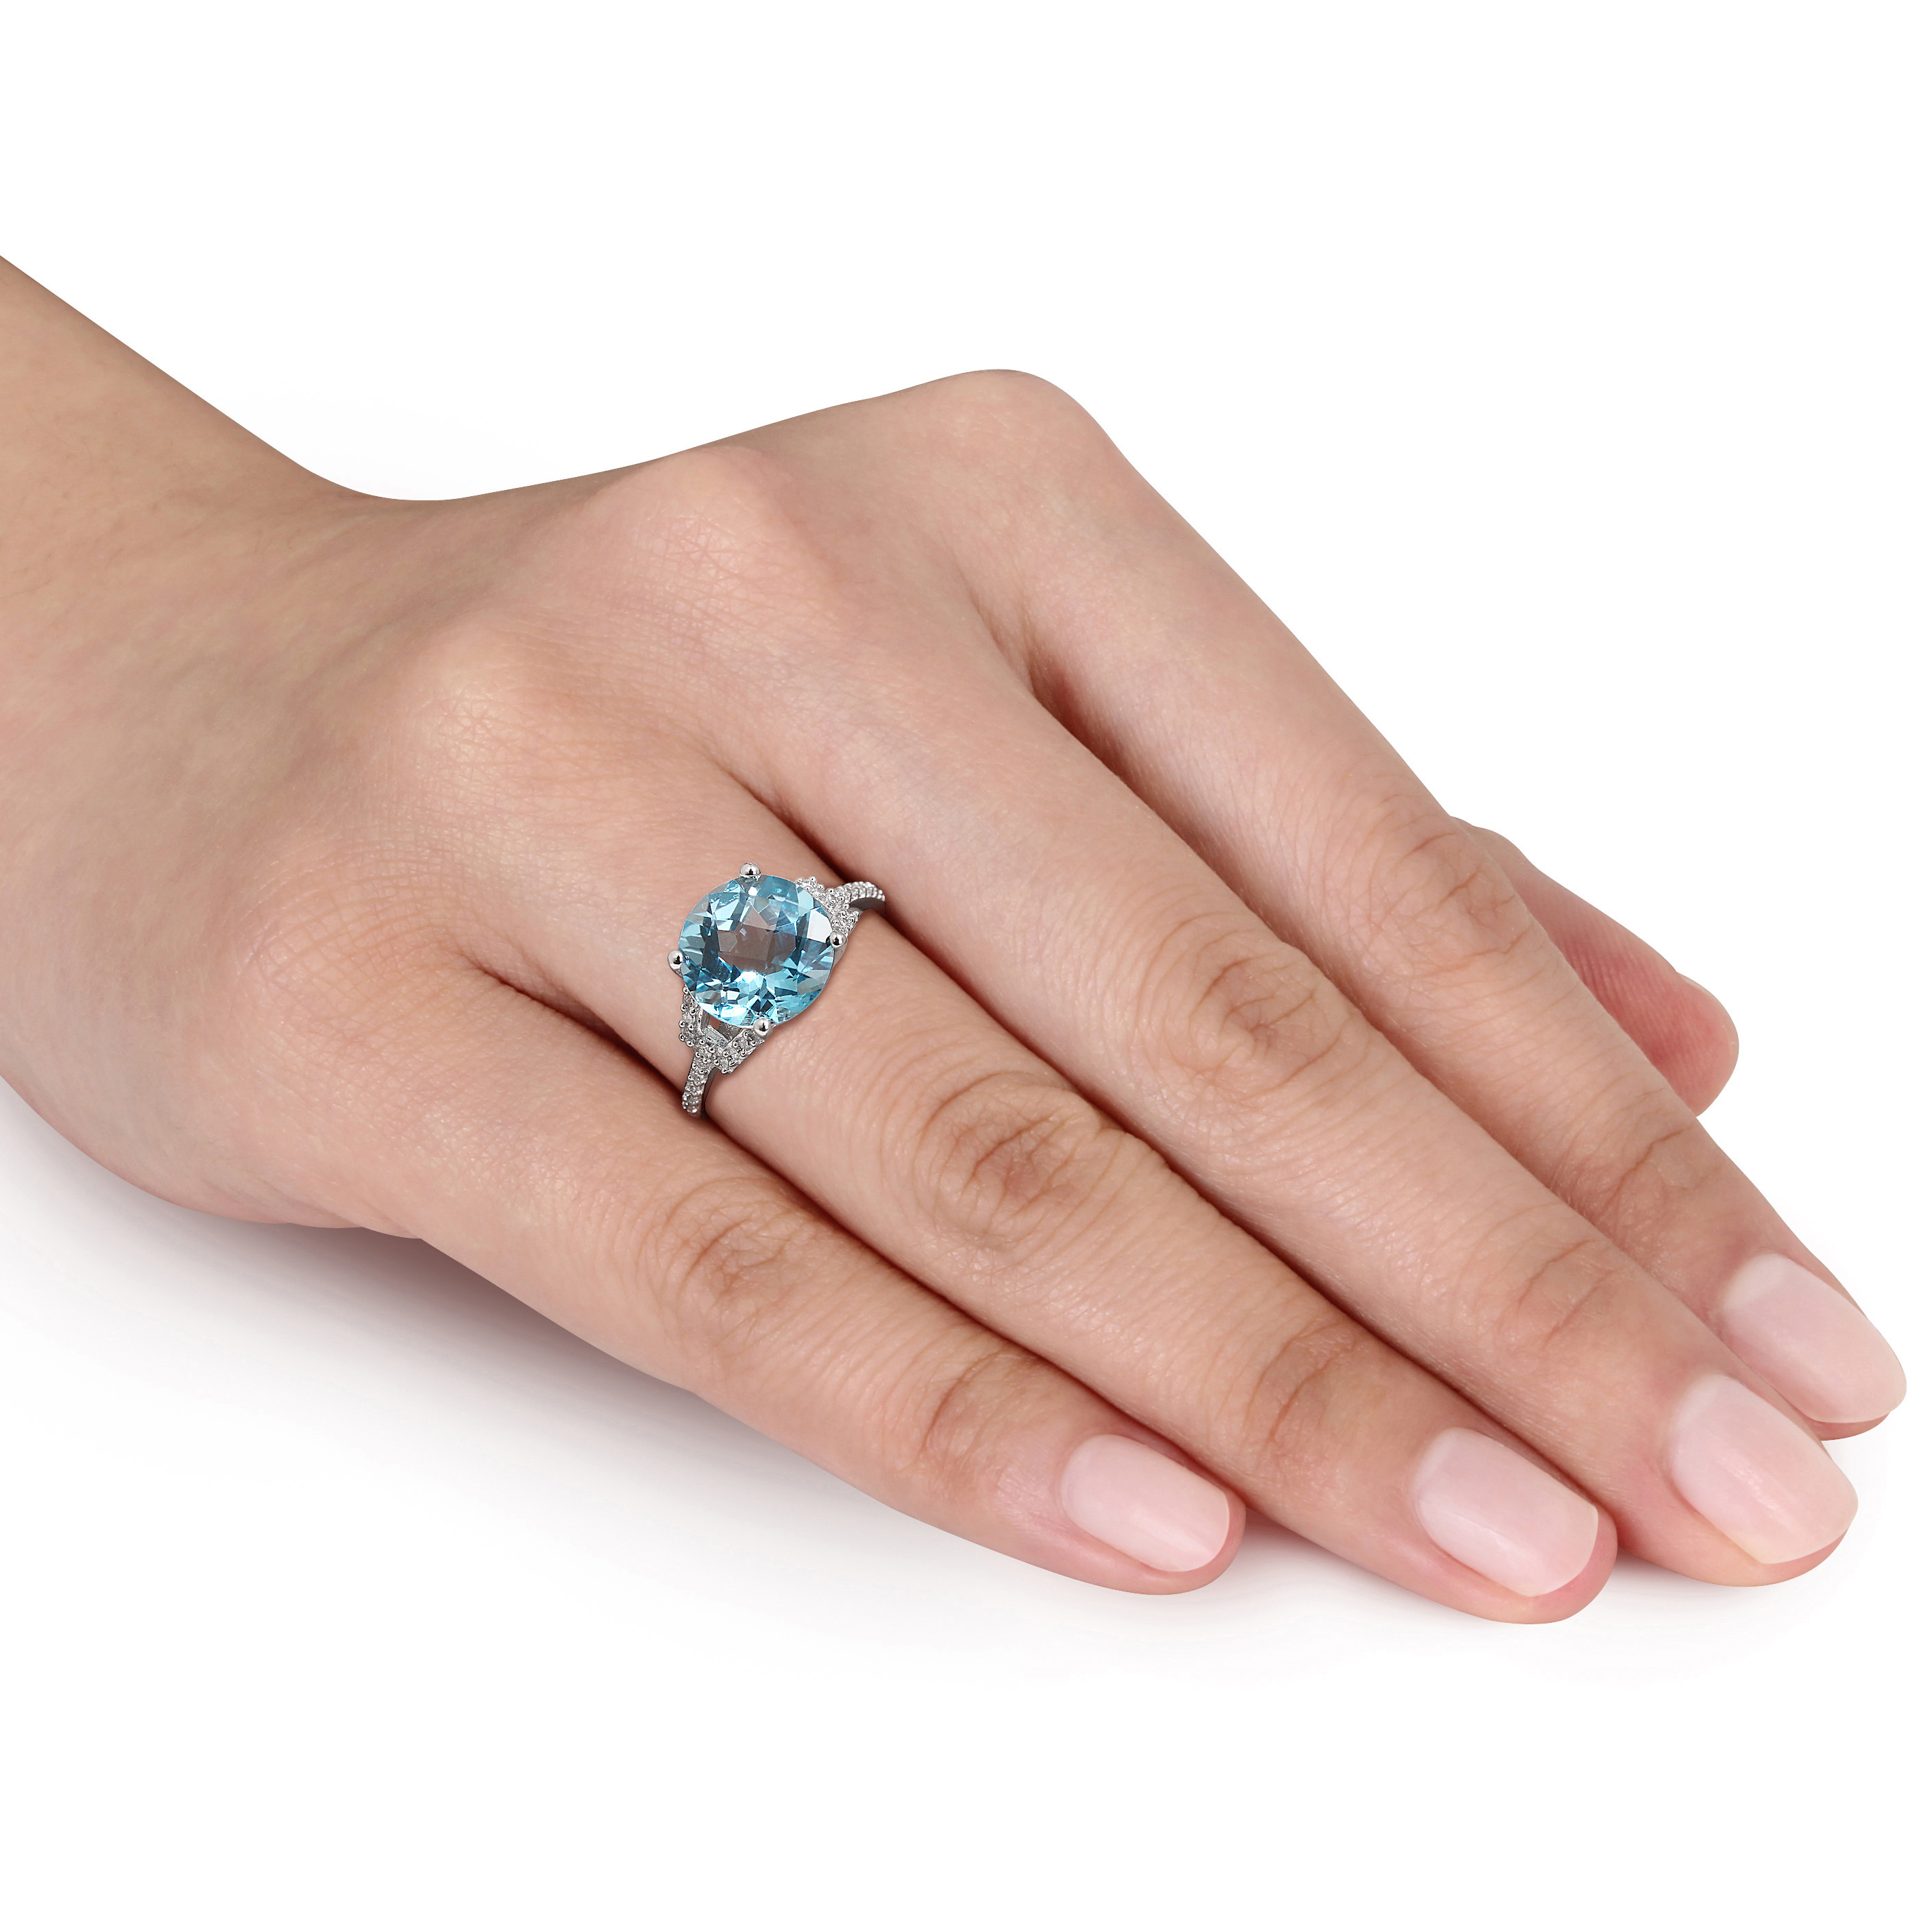 1/6 CT TW Diamond and 4 3/5 CT TGW Swiss Blue Topaz Sollitaire Ring in 14k White Gold